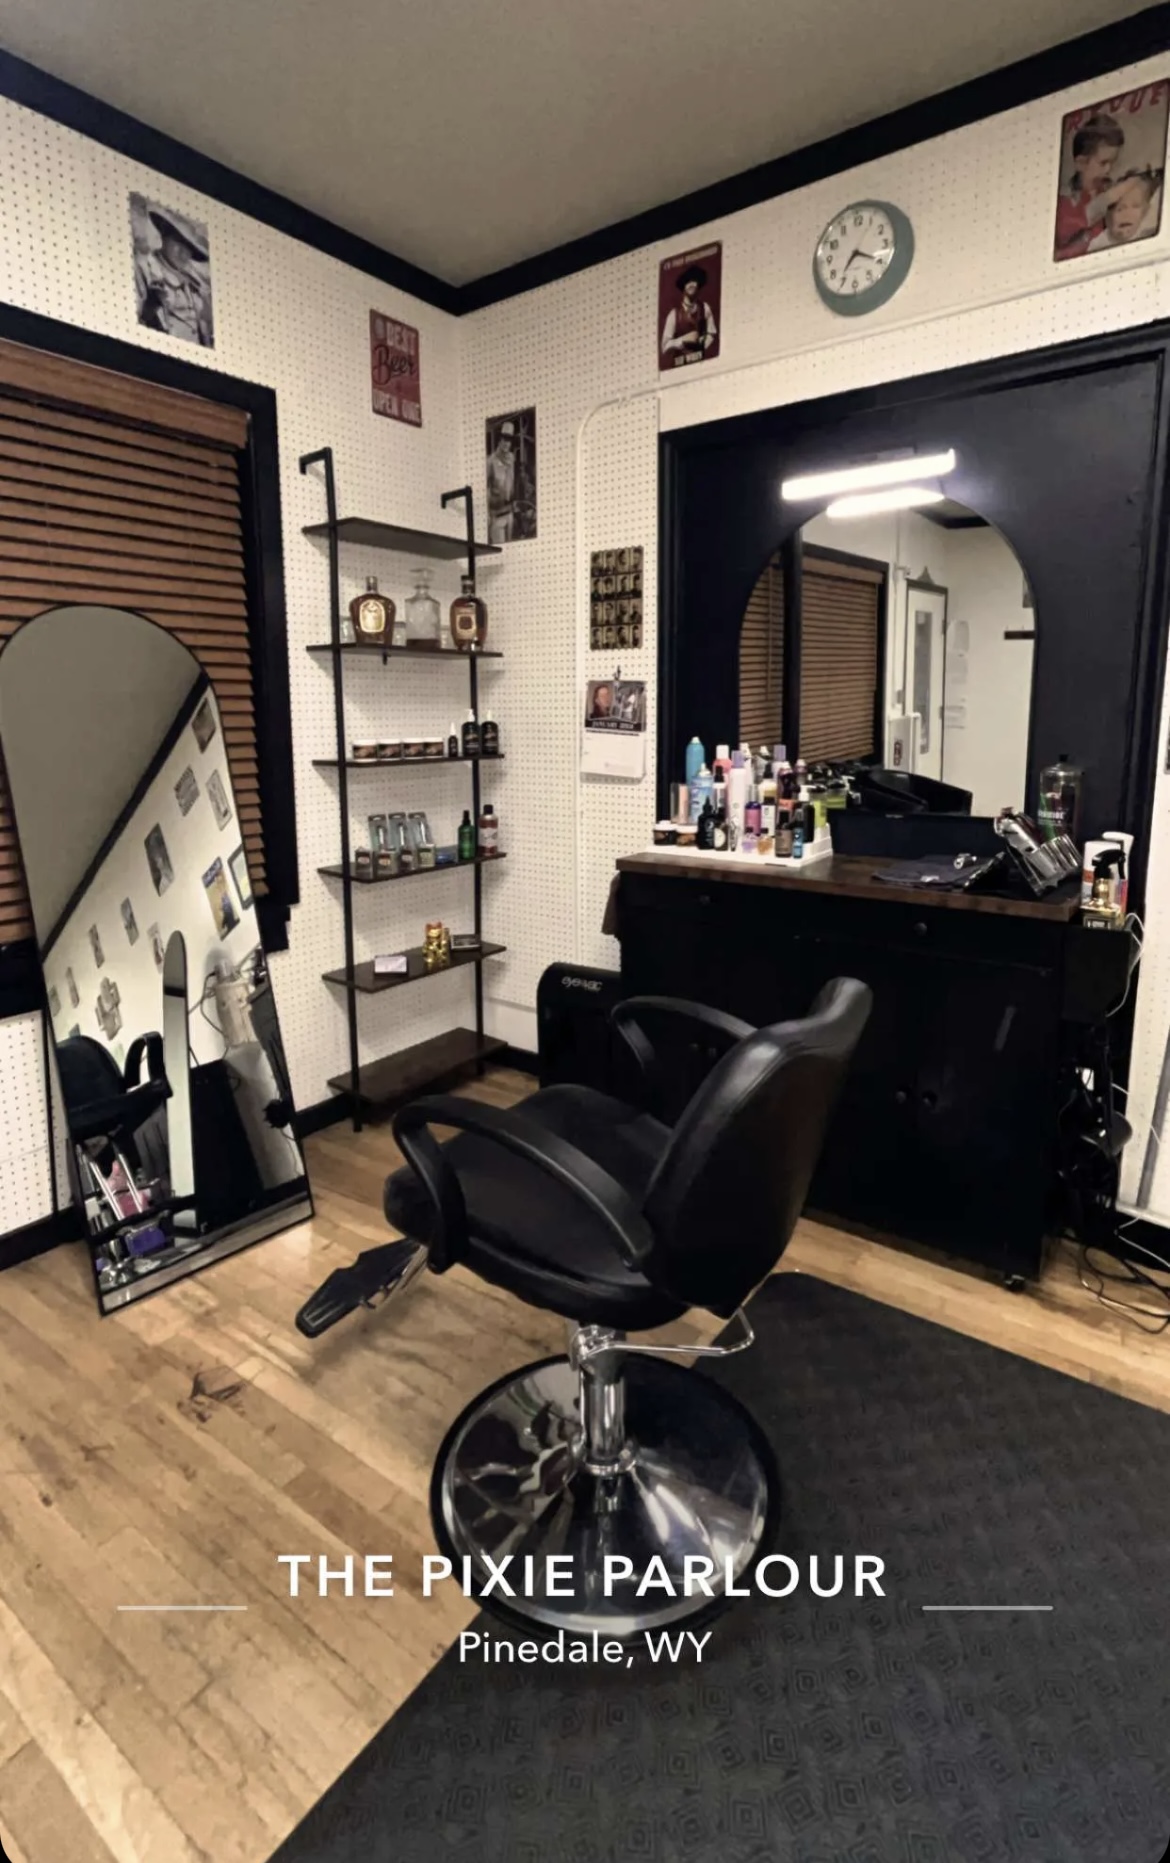 The Pixie Parlour Beauty & Gentlemen’s Cuts 225 S Sublette Ave, Pinedale Wyoming 82941